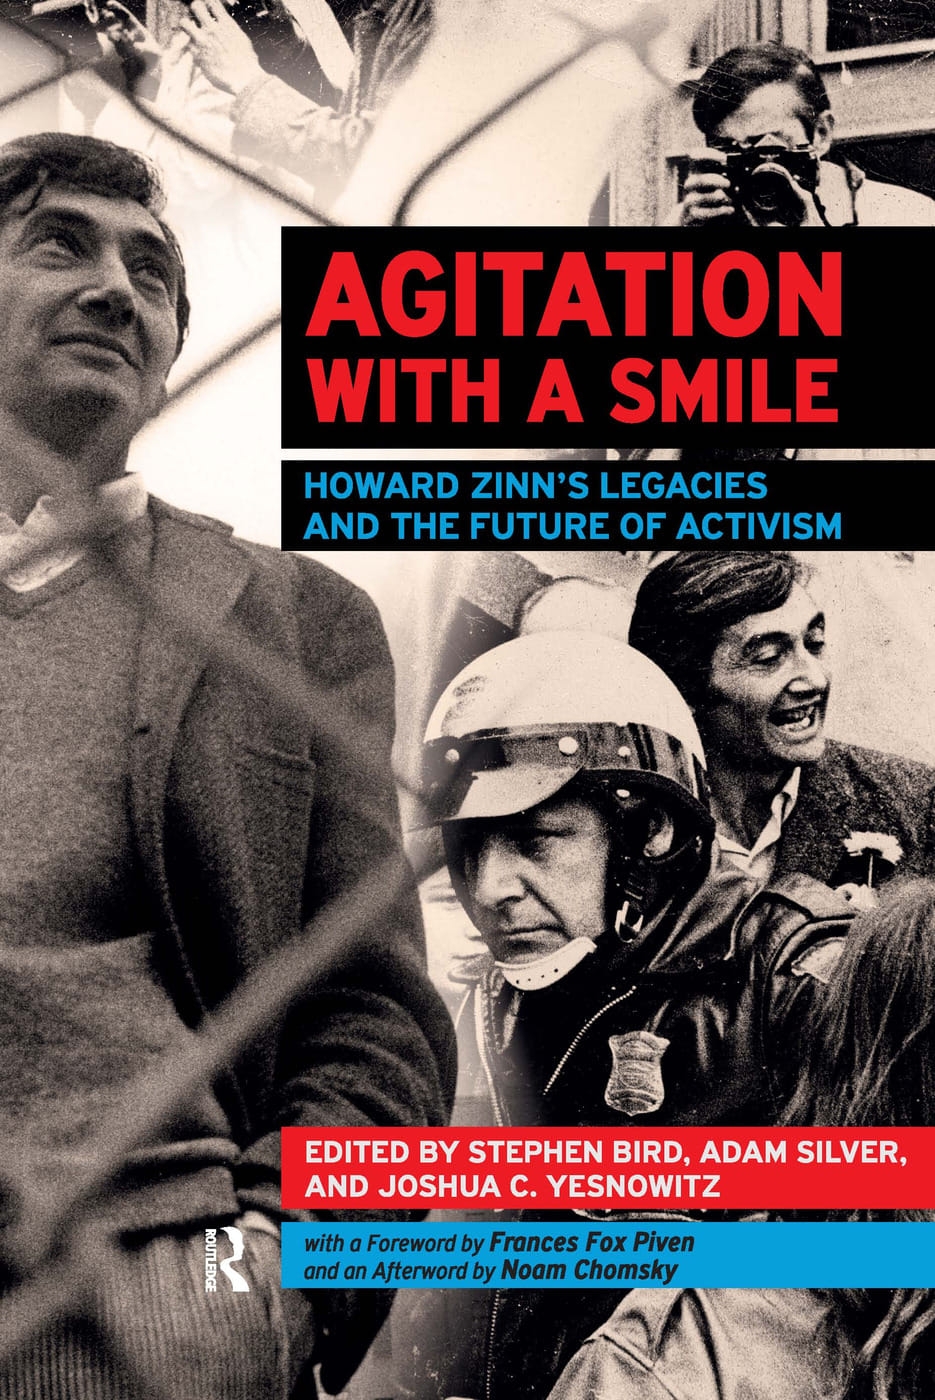 Agitation with a Smile: Howard Zinn’s Legacies and the Future of Activism